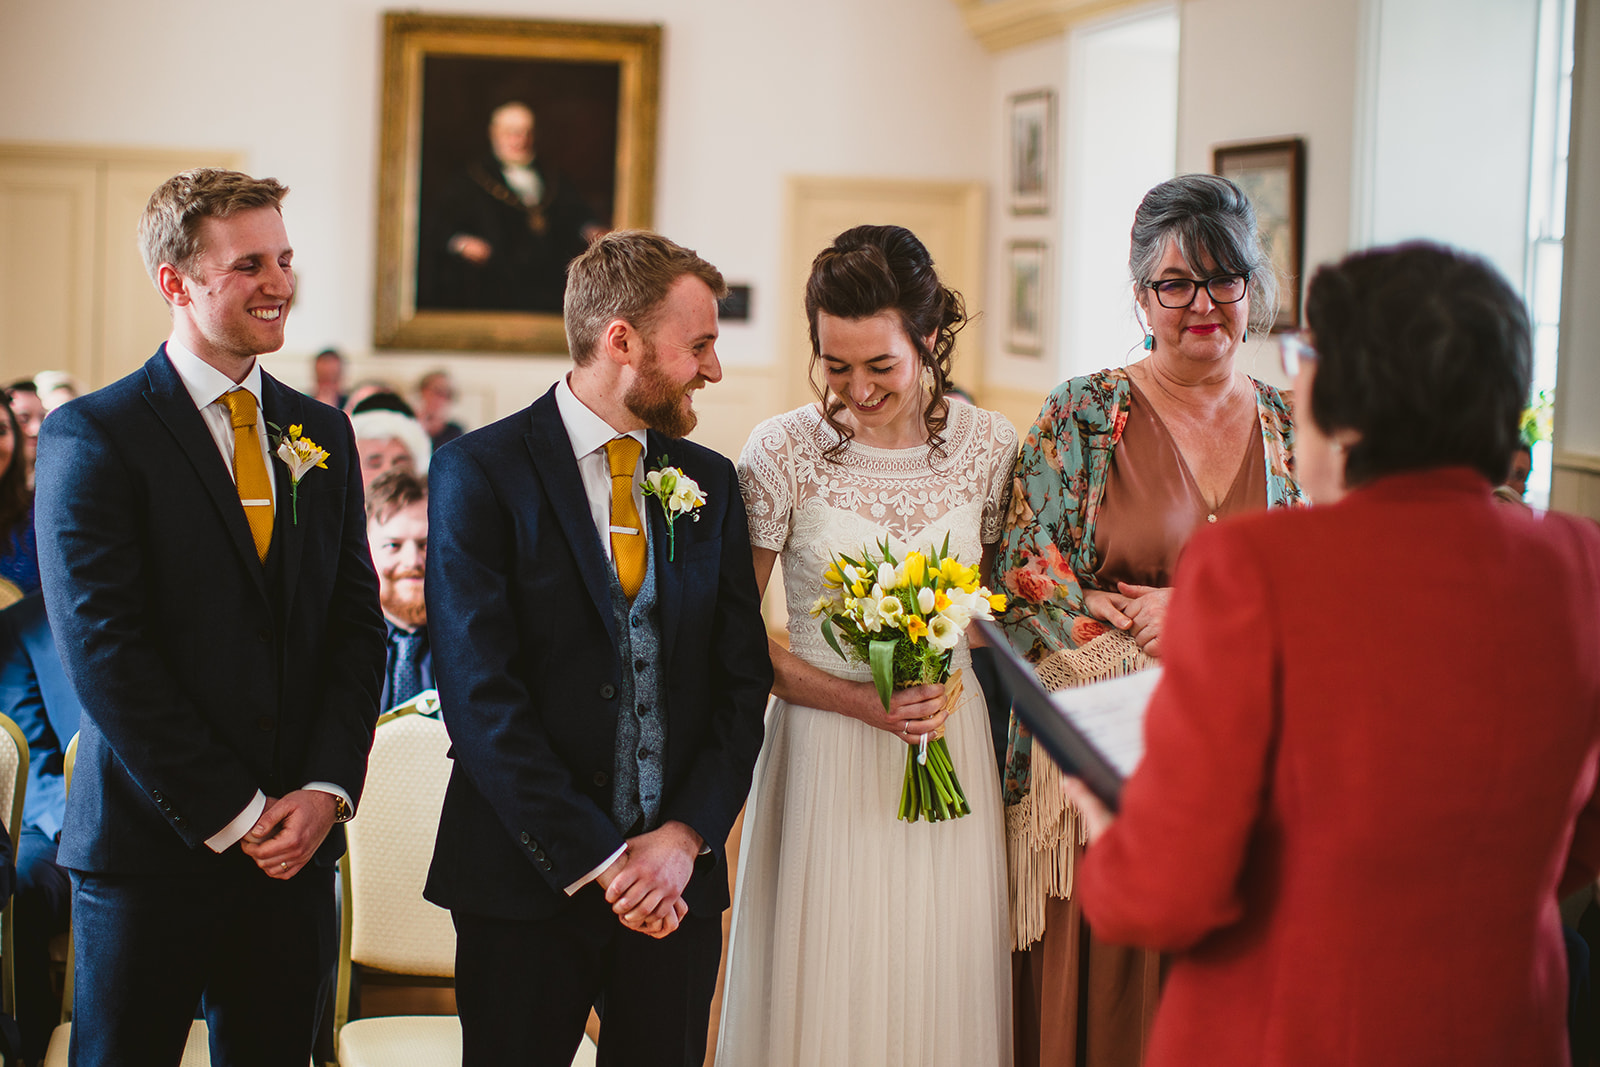 Ceremony at Penryn Town Hall, Falmouth